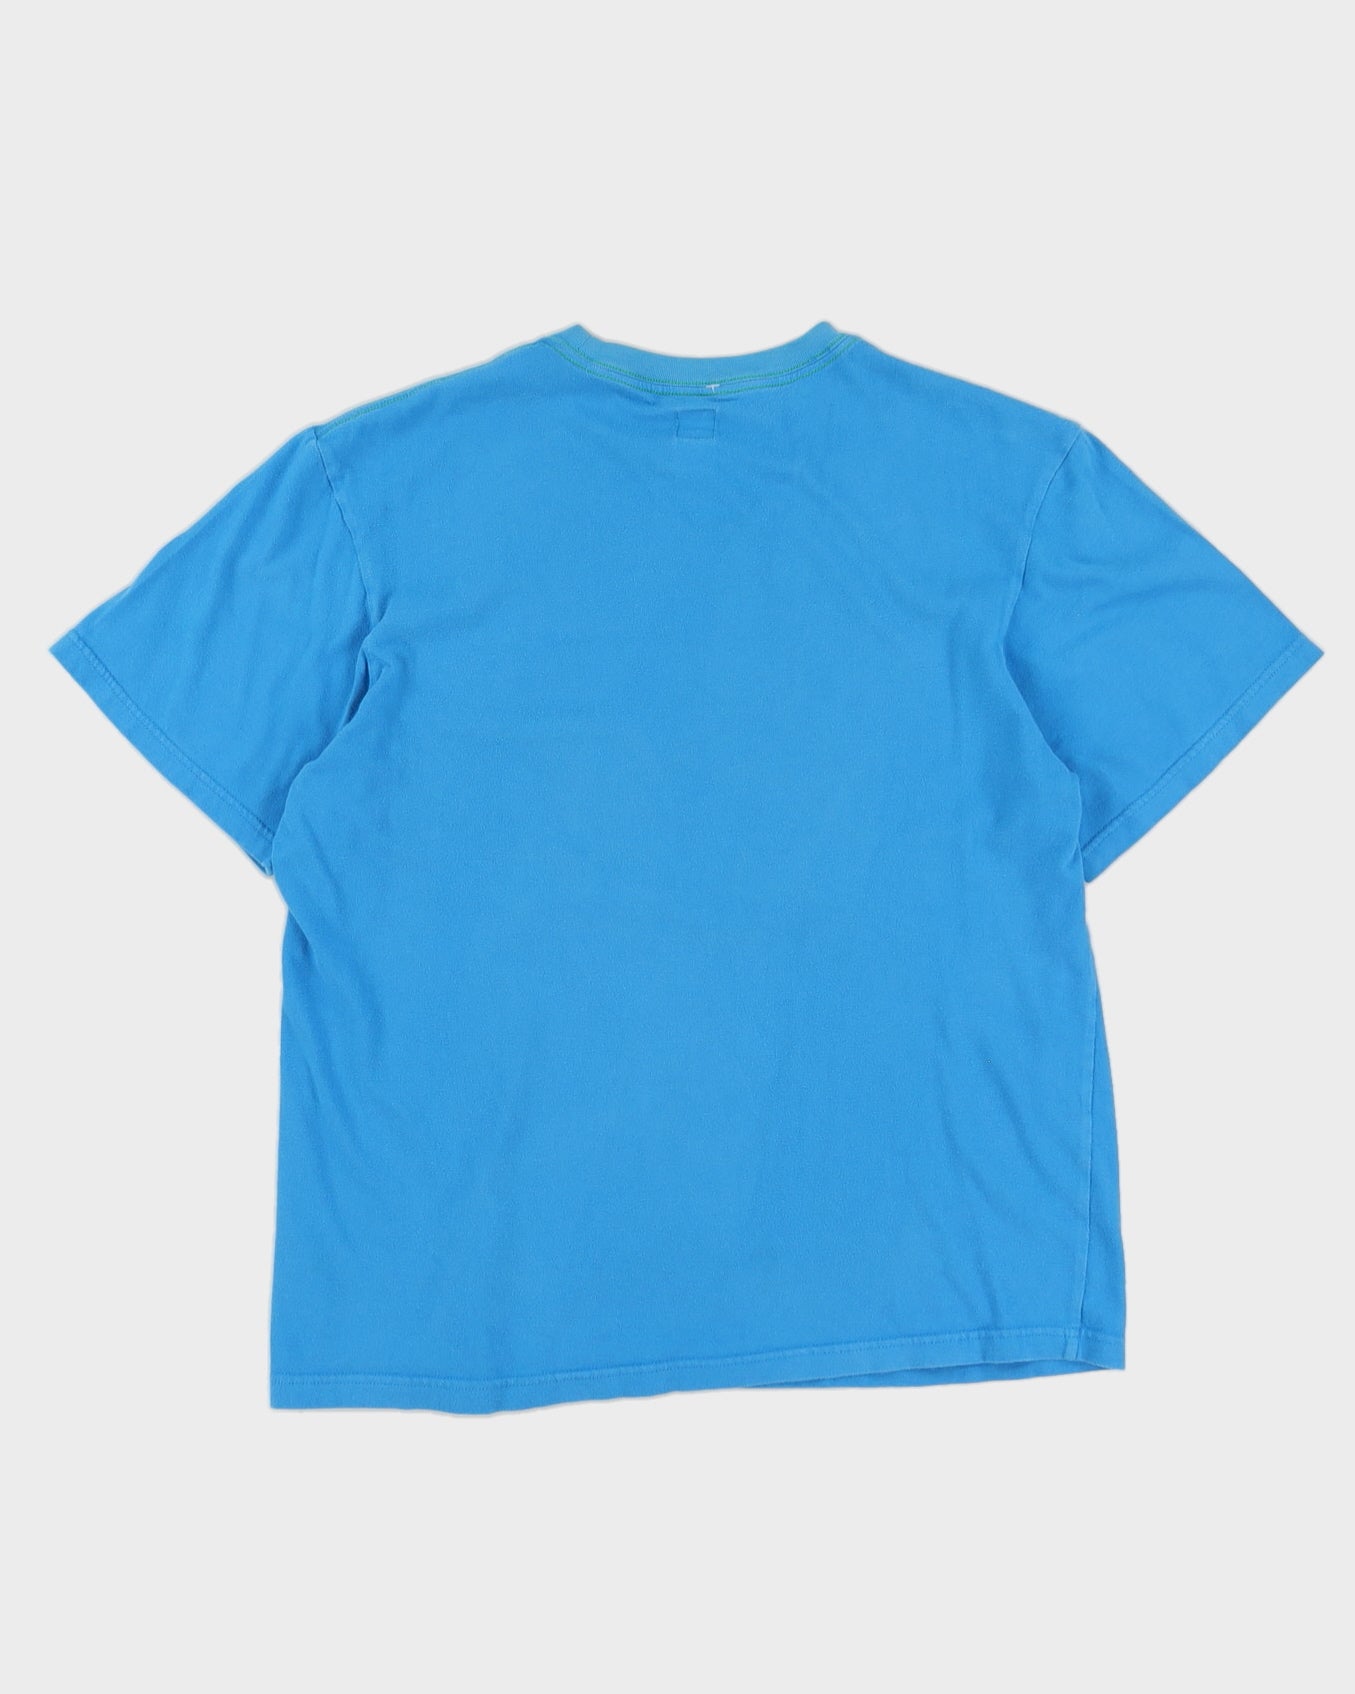 00s Y2K Adidas Blue Embroidered T-Shirt - L